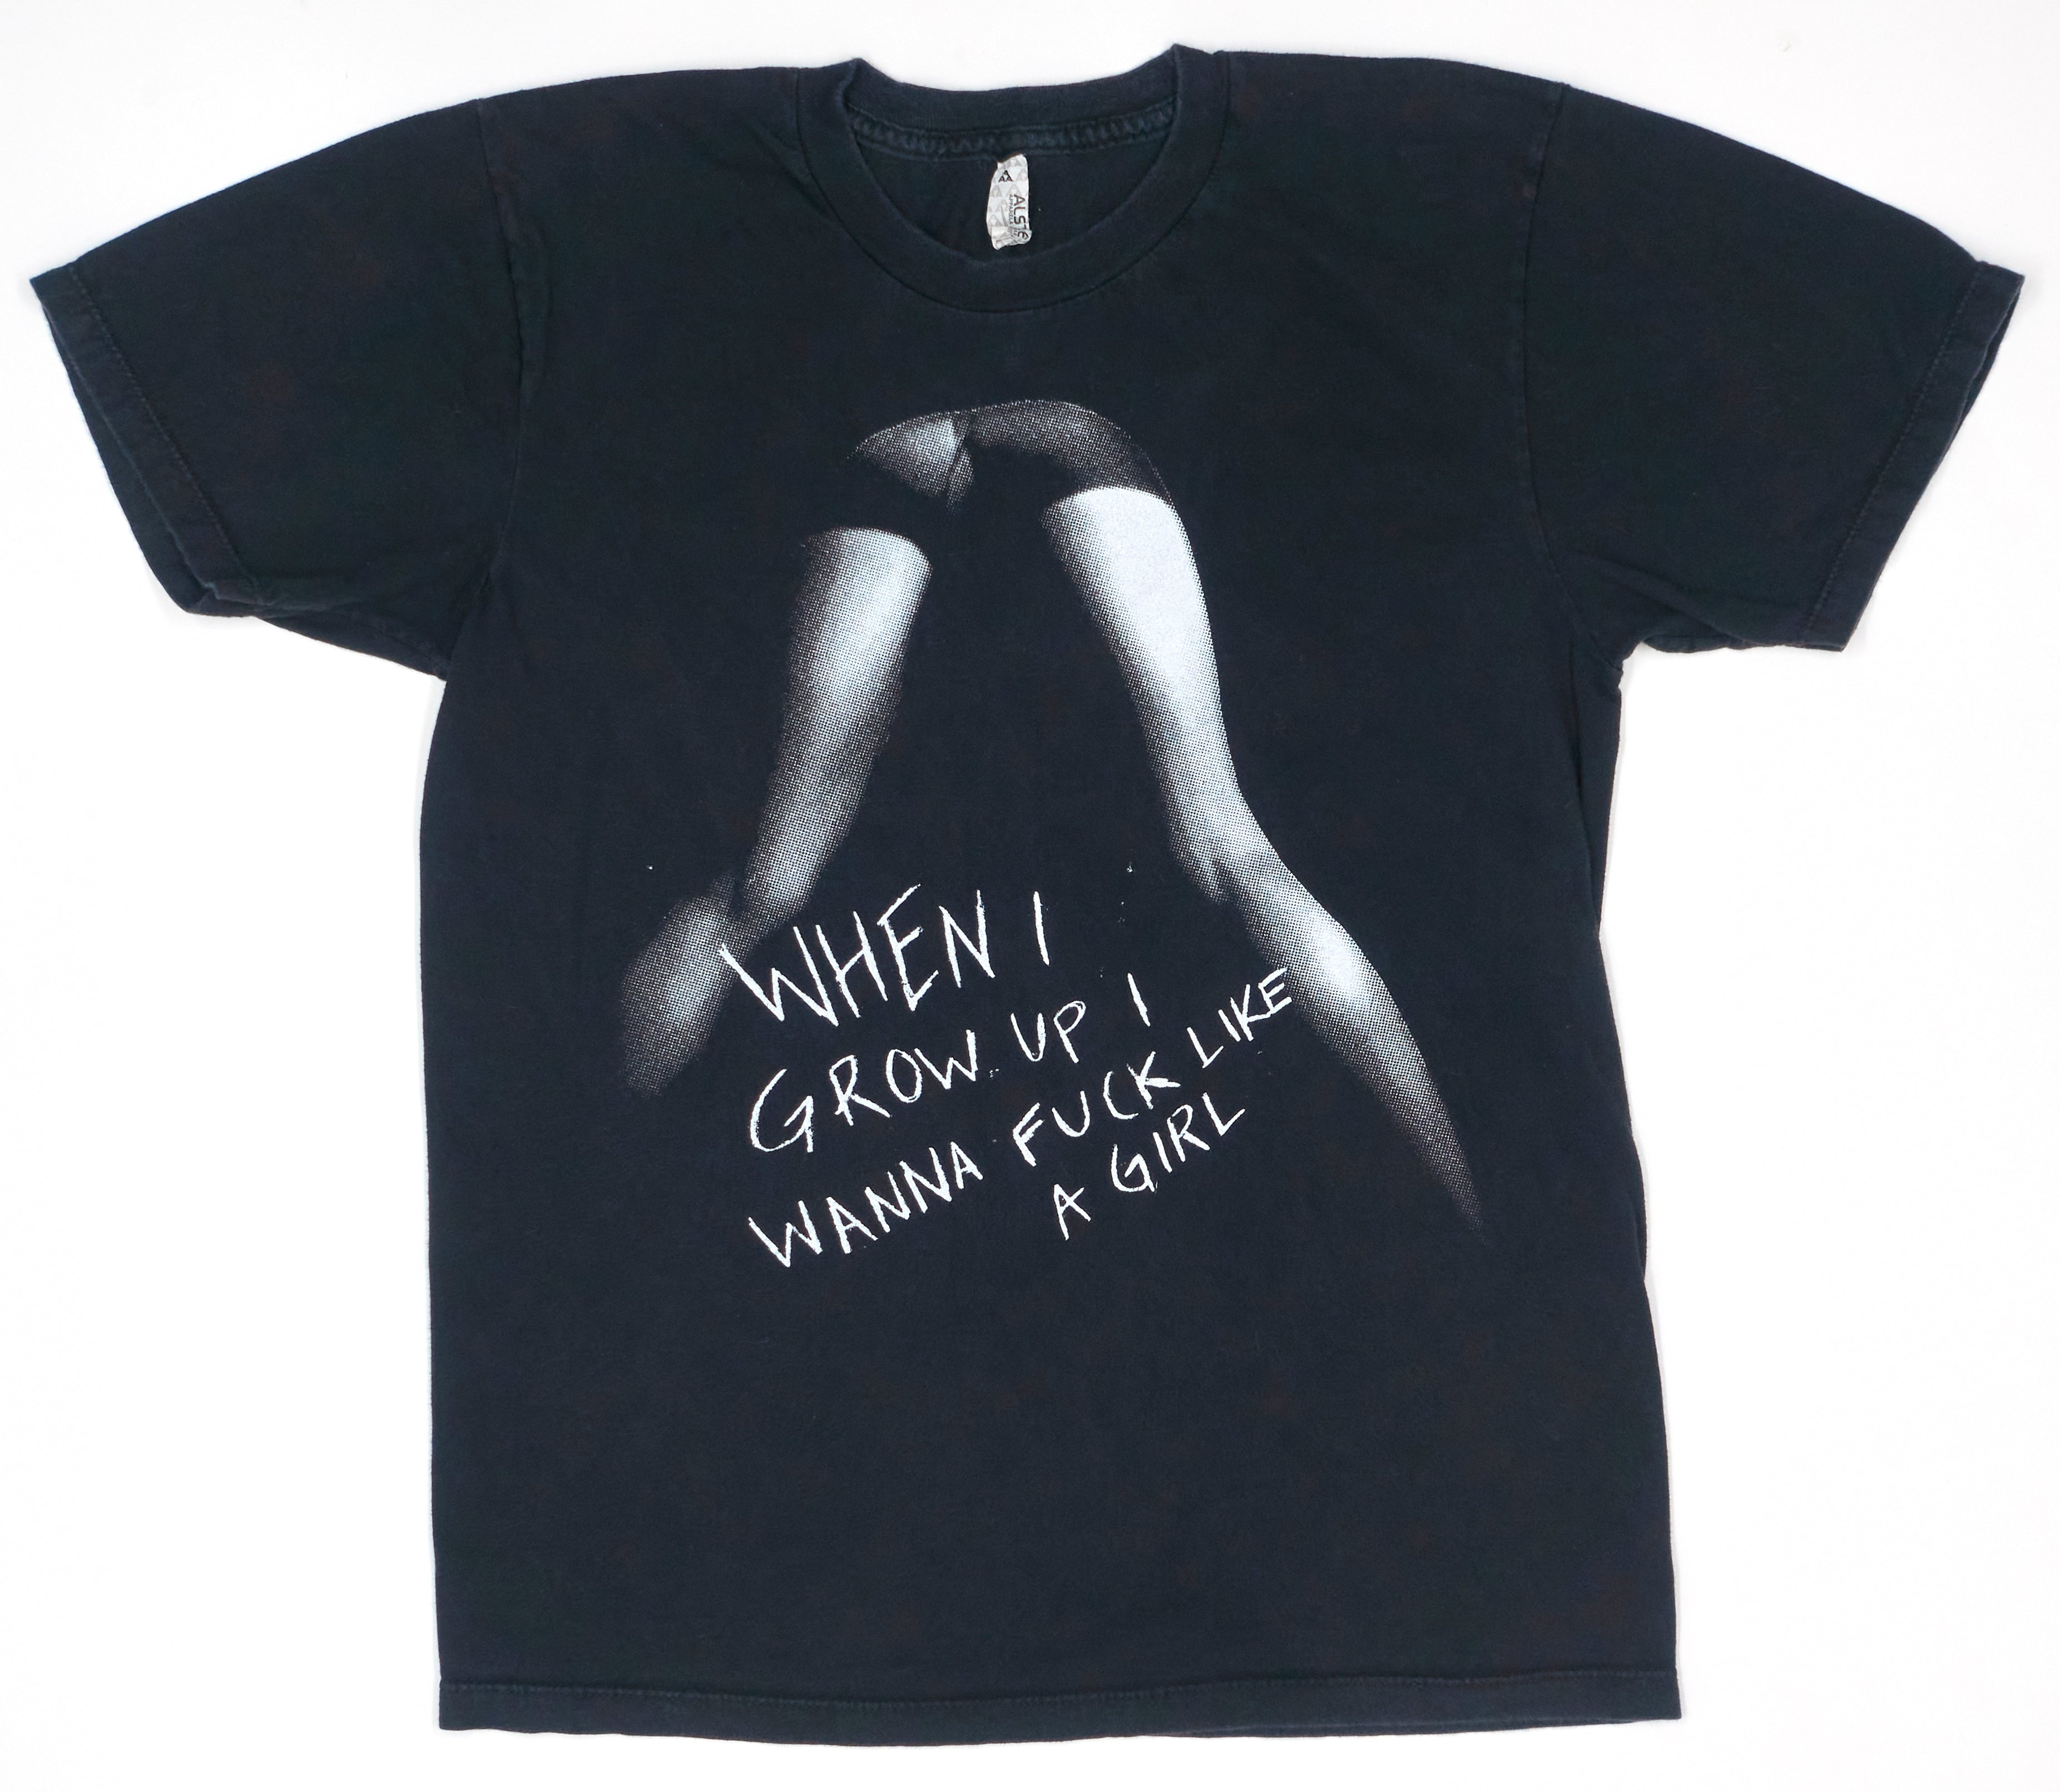 All Leather – When I Grow Up, I Wanna Fuck Like A Girl 2010 Tour Shirt Size Small